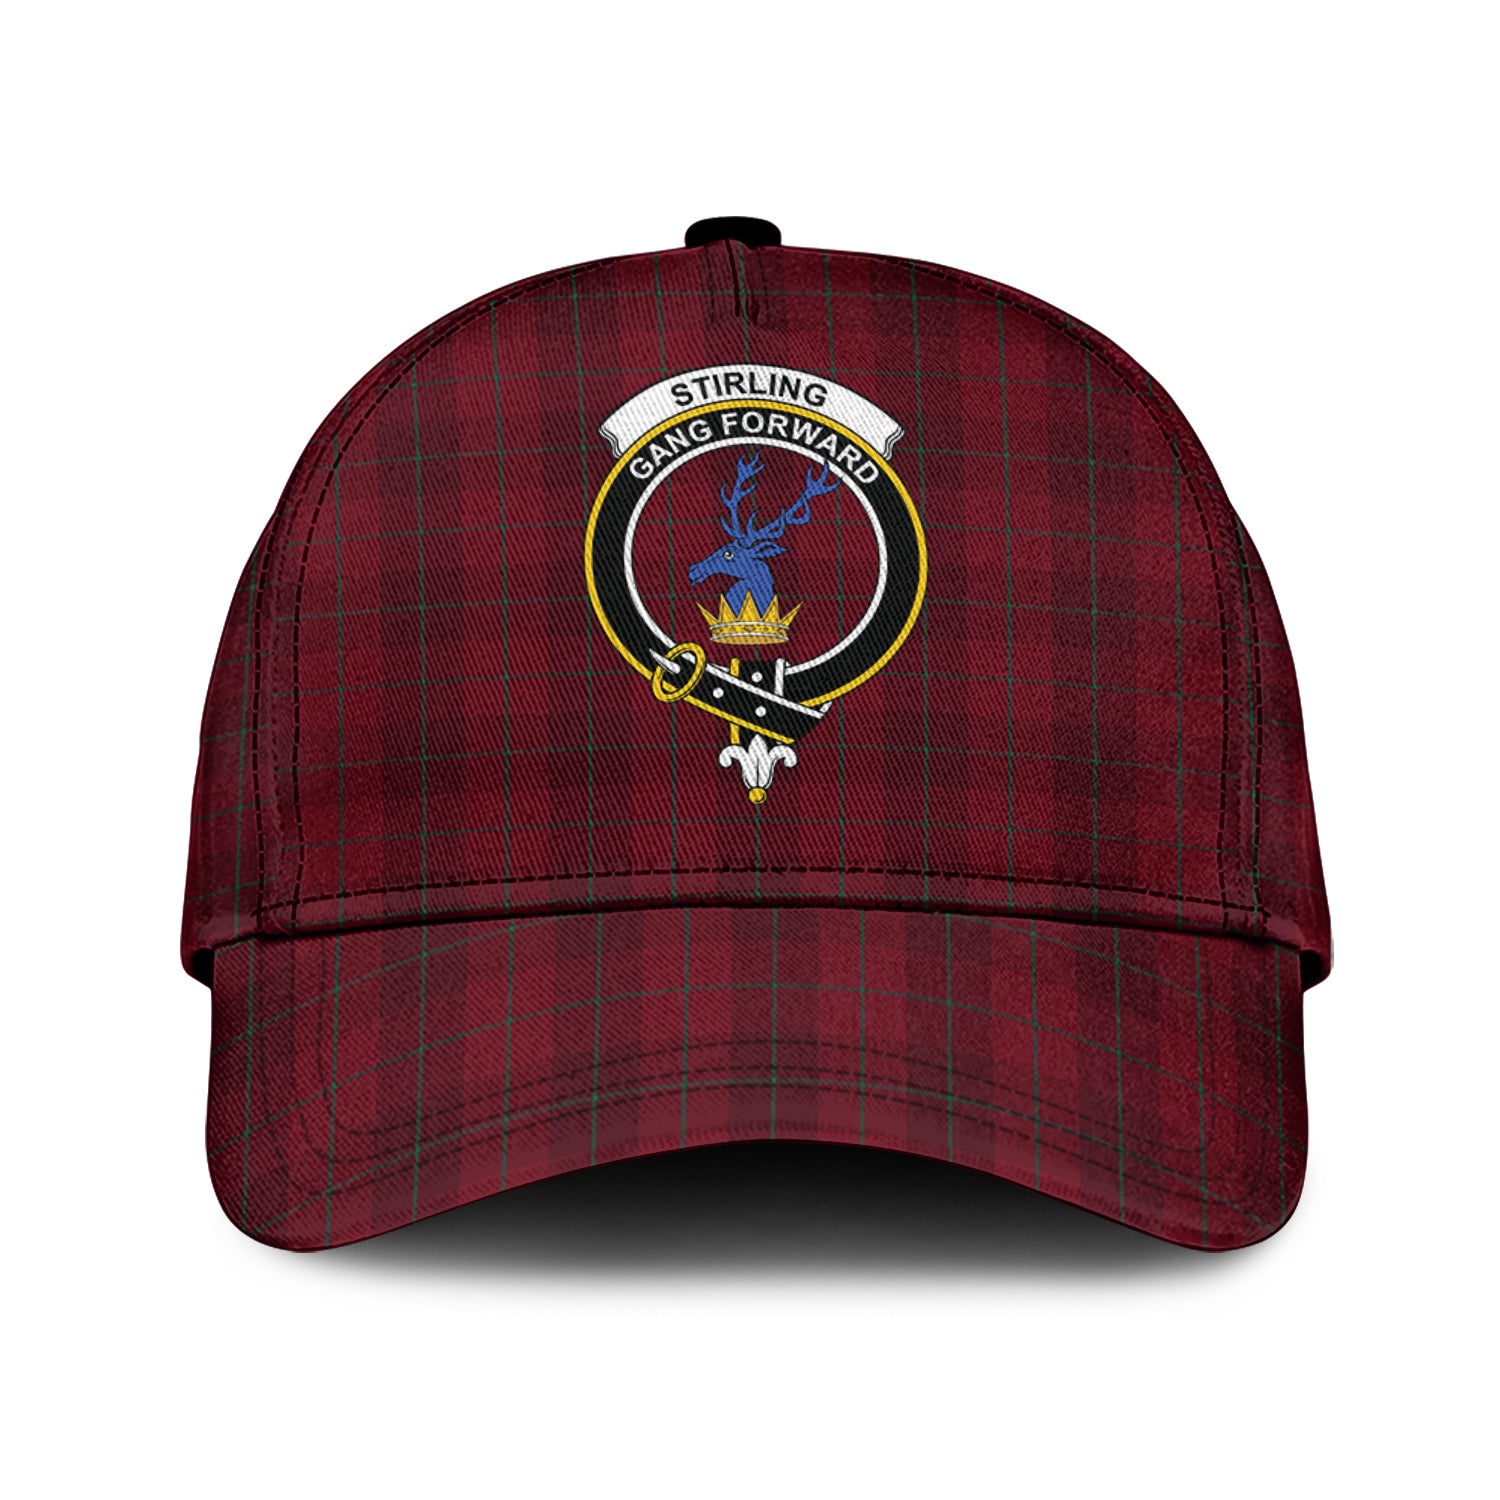 stirling-of-keir-tartan-classic-cap-with-family-crest